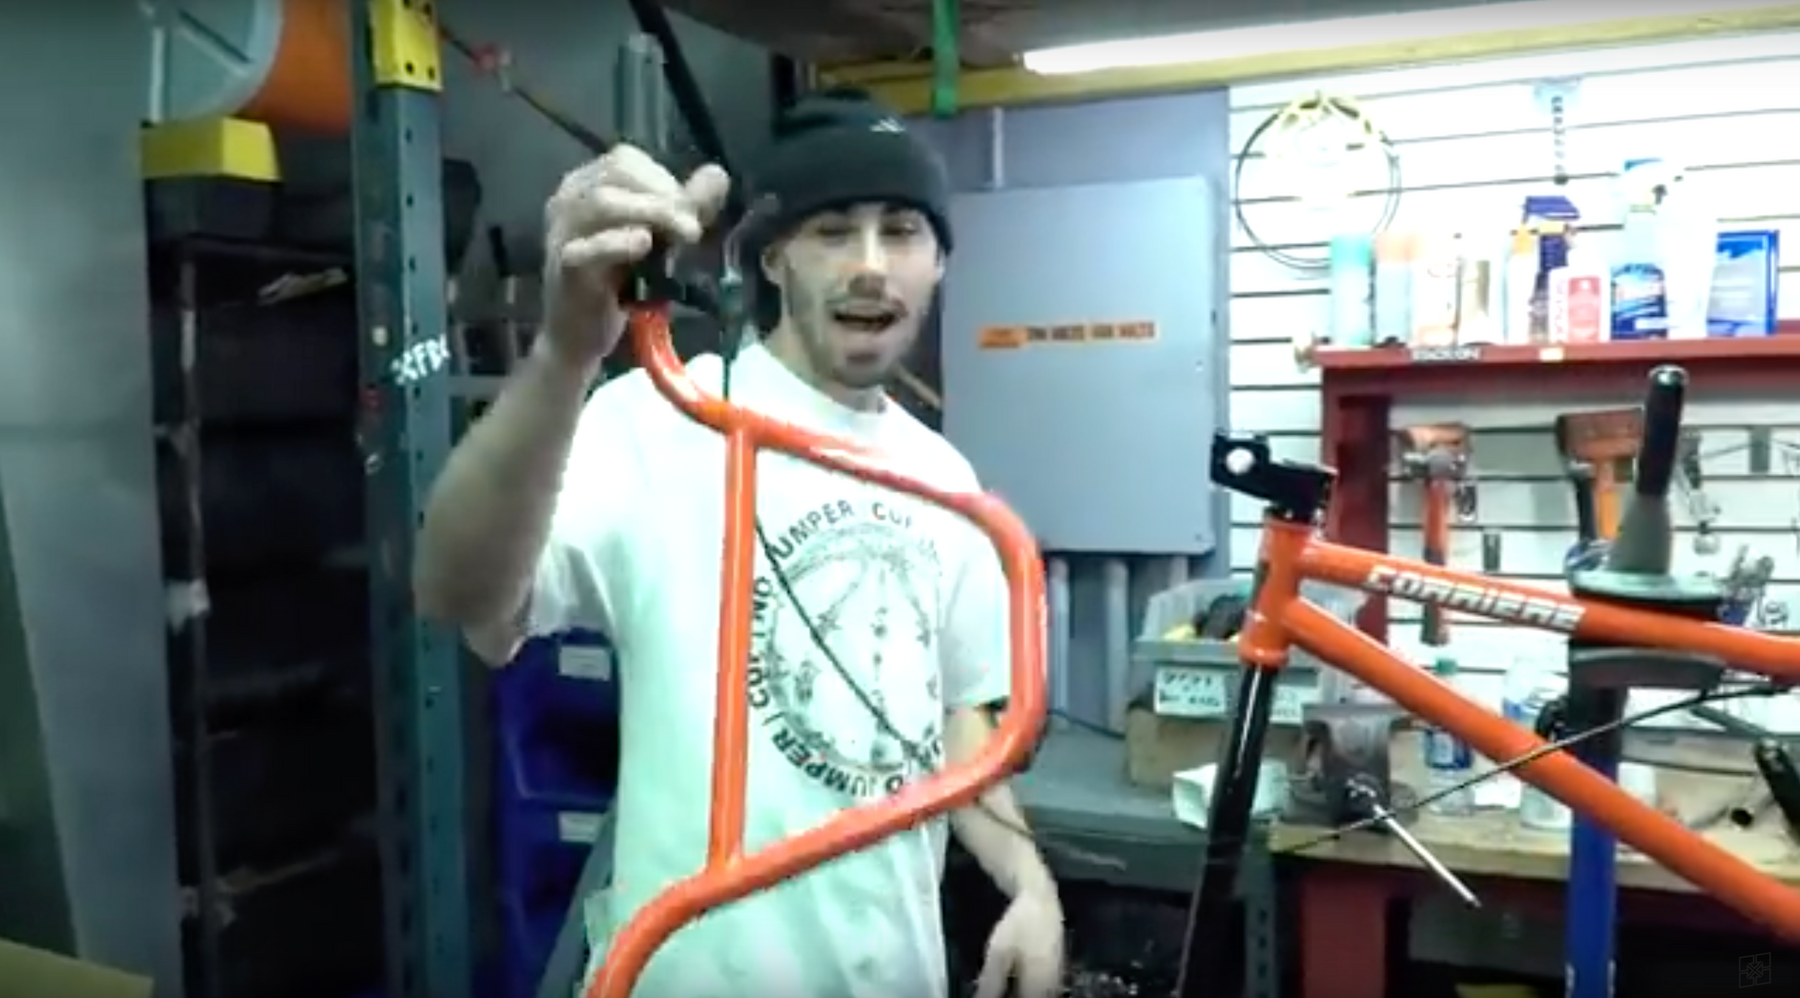 Fitbikeco. - Keys to the Cage - Ethan Corriere & His Red Hot Complete bike give-a-way